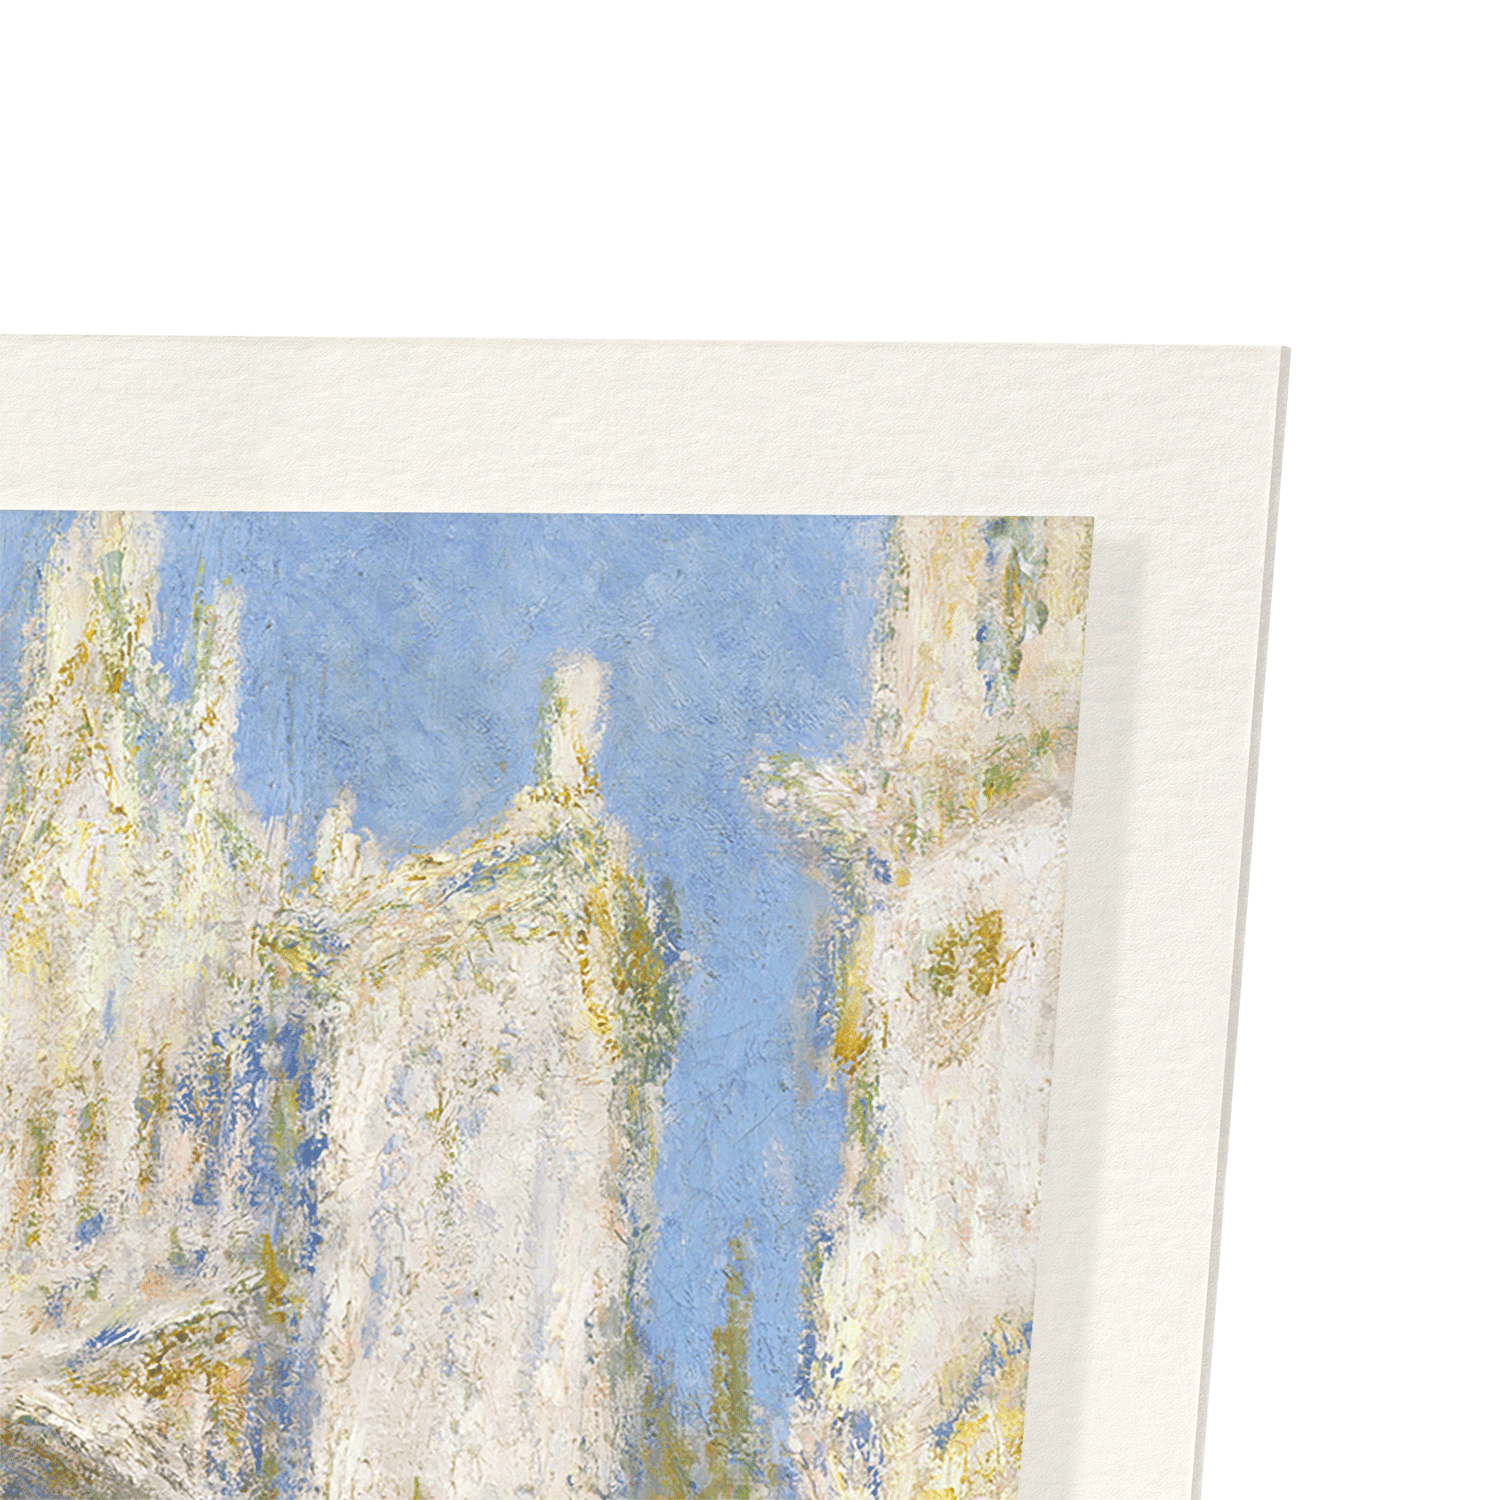 ROUEN CATHEDRAL WEST FAÇADE BY MONET: Painting Art Print